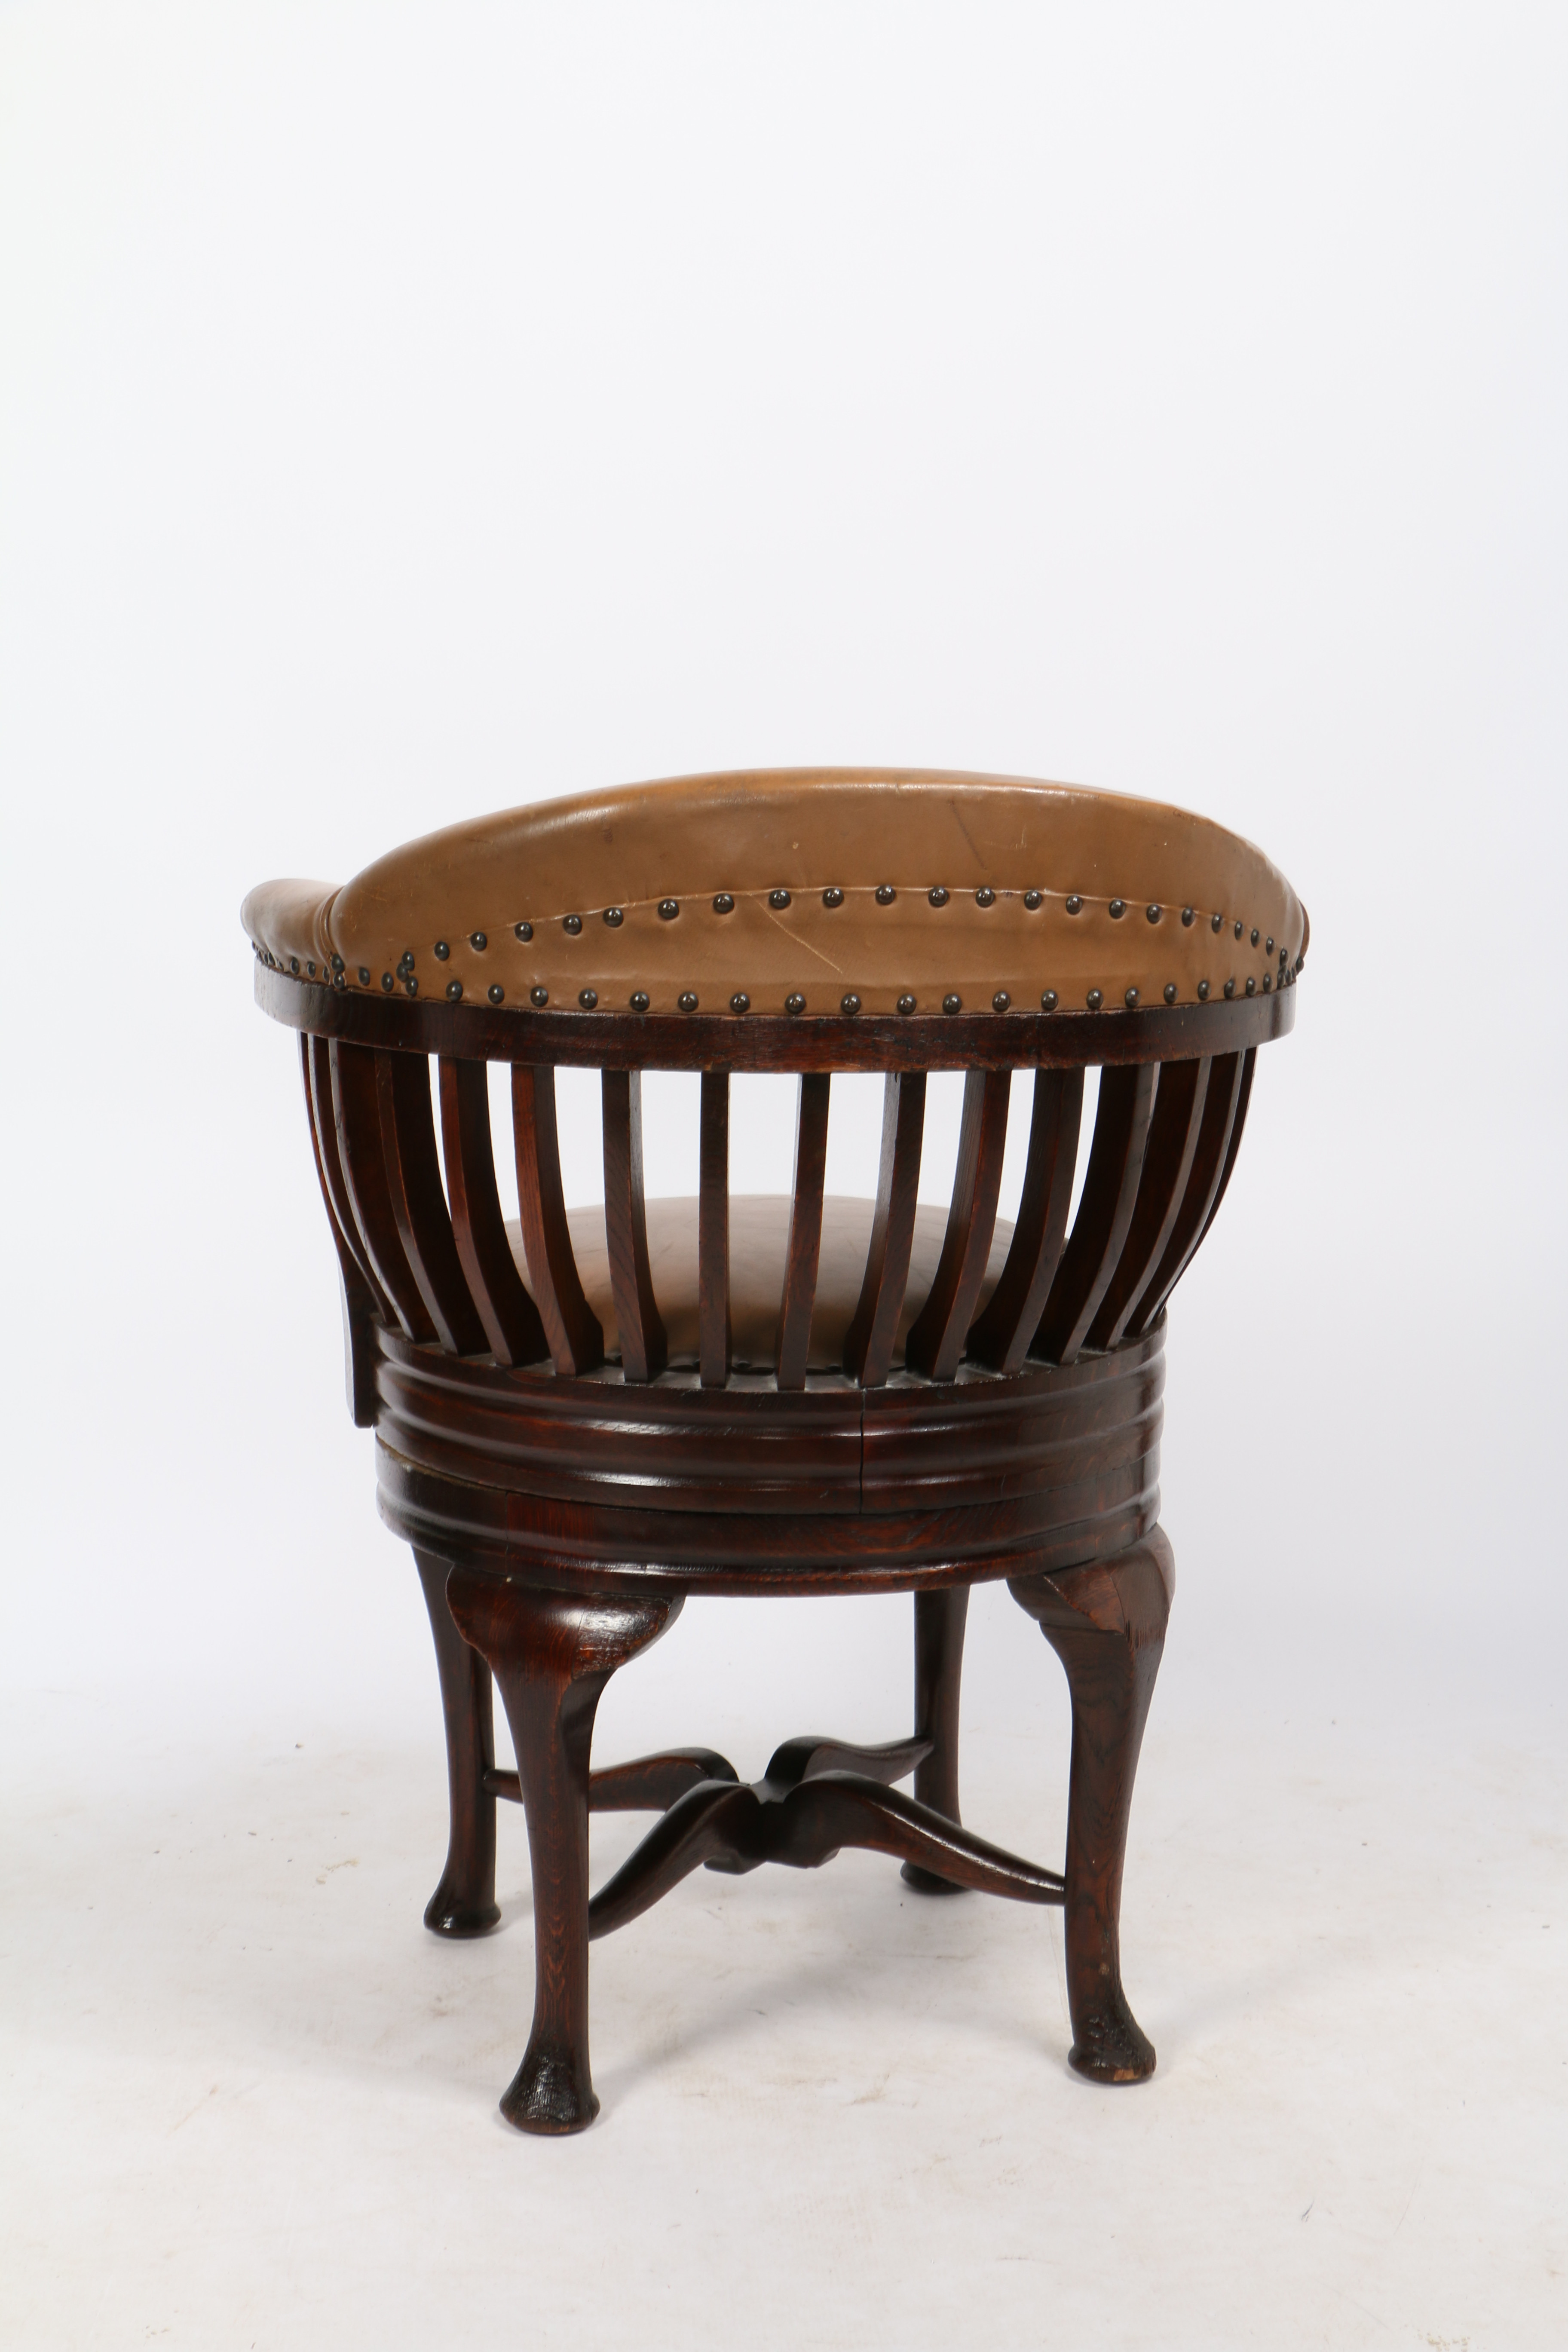 AN EARLY 20TH CENTURY OAK AND LEATHER CAPTAIN'S SWIVEL DESK CHAIR. - Image 6 of 7